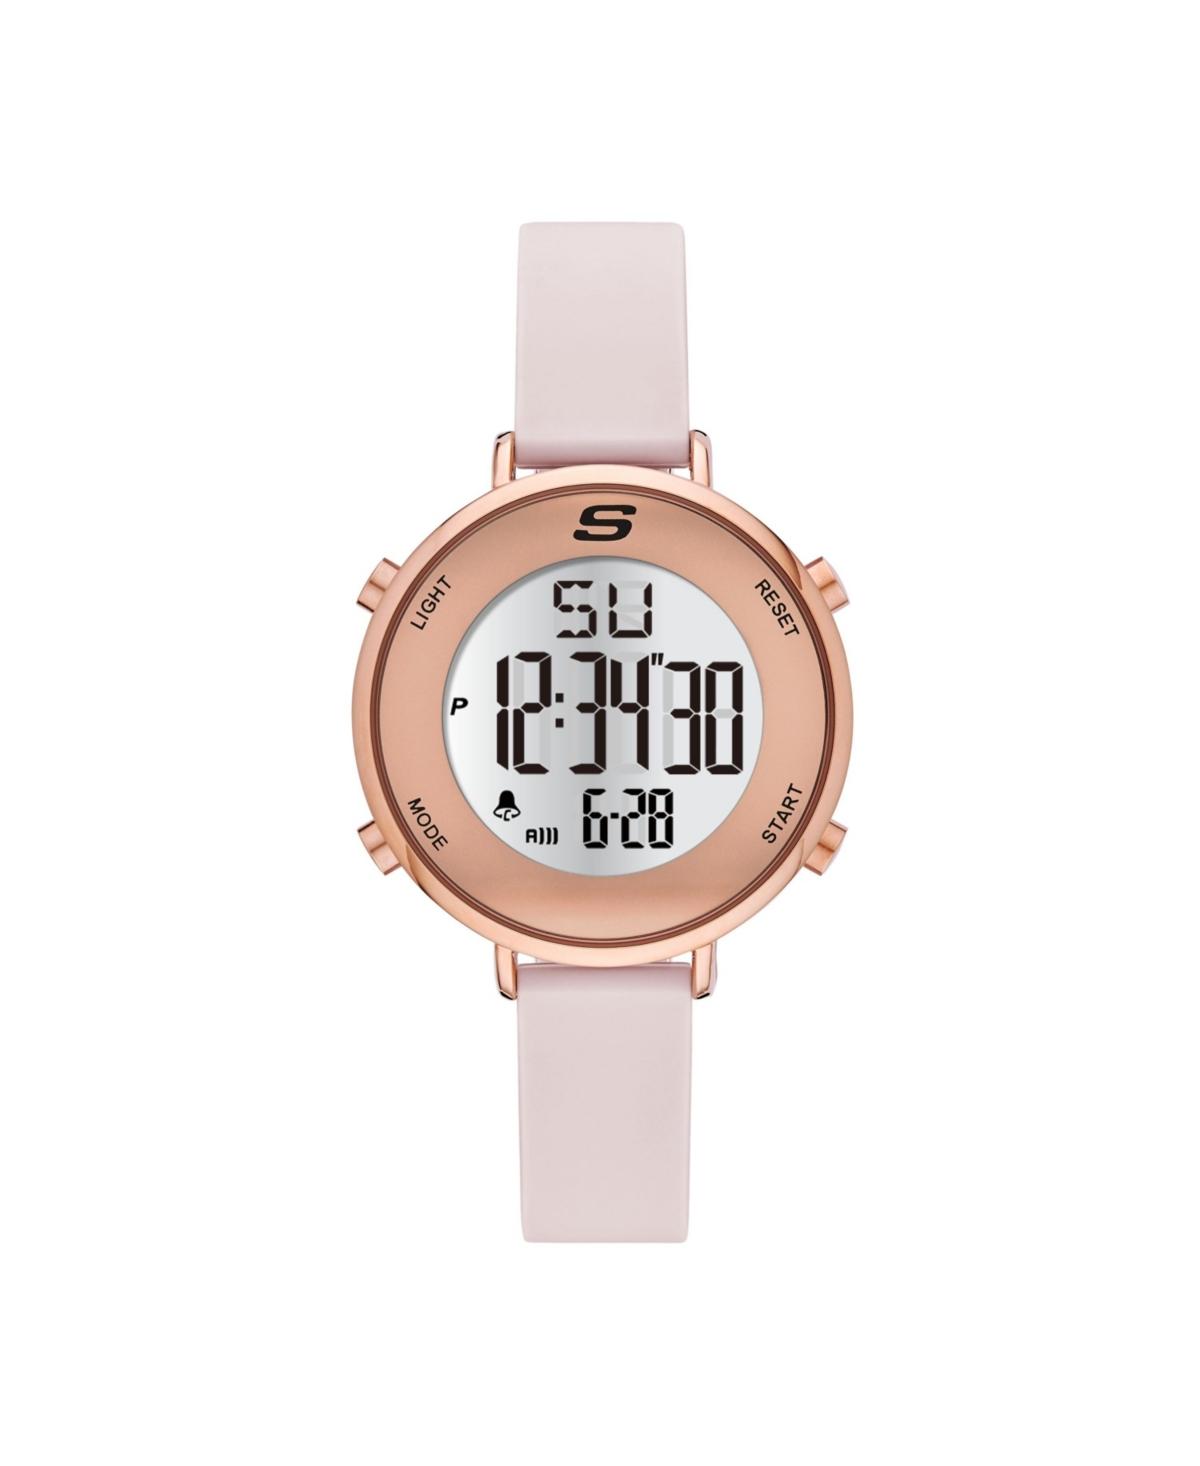 Digital White | Skechers Lyst Chronograph Watch in Pink Magnolia 40mm